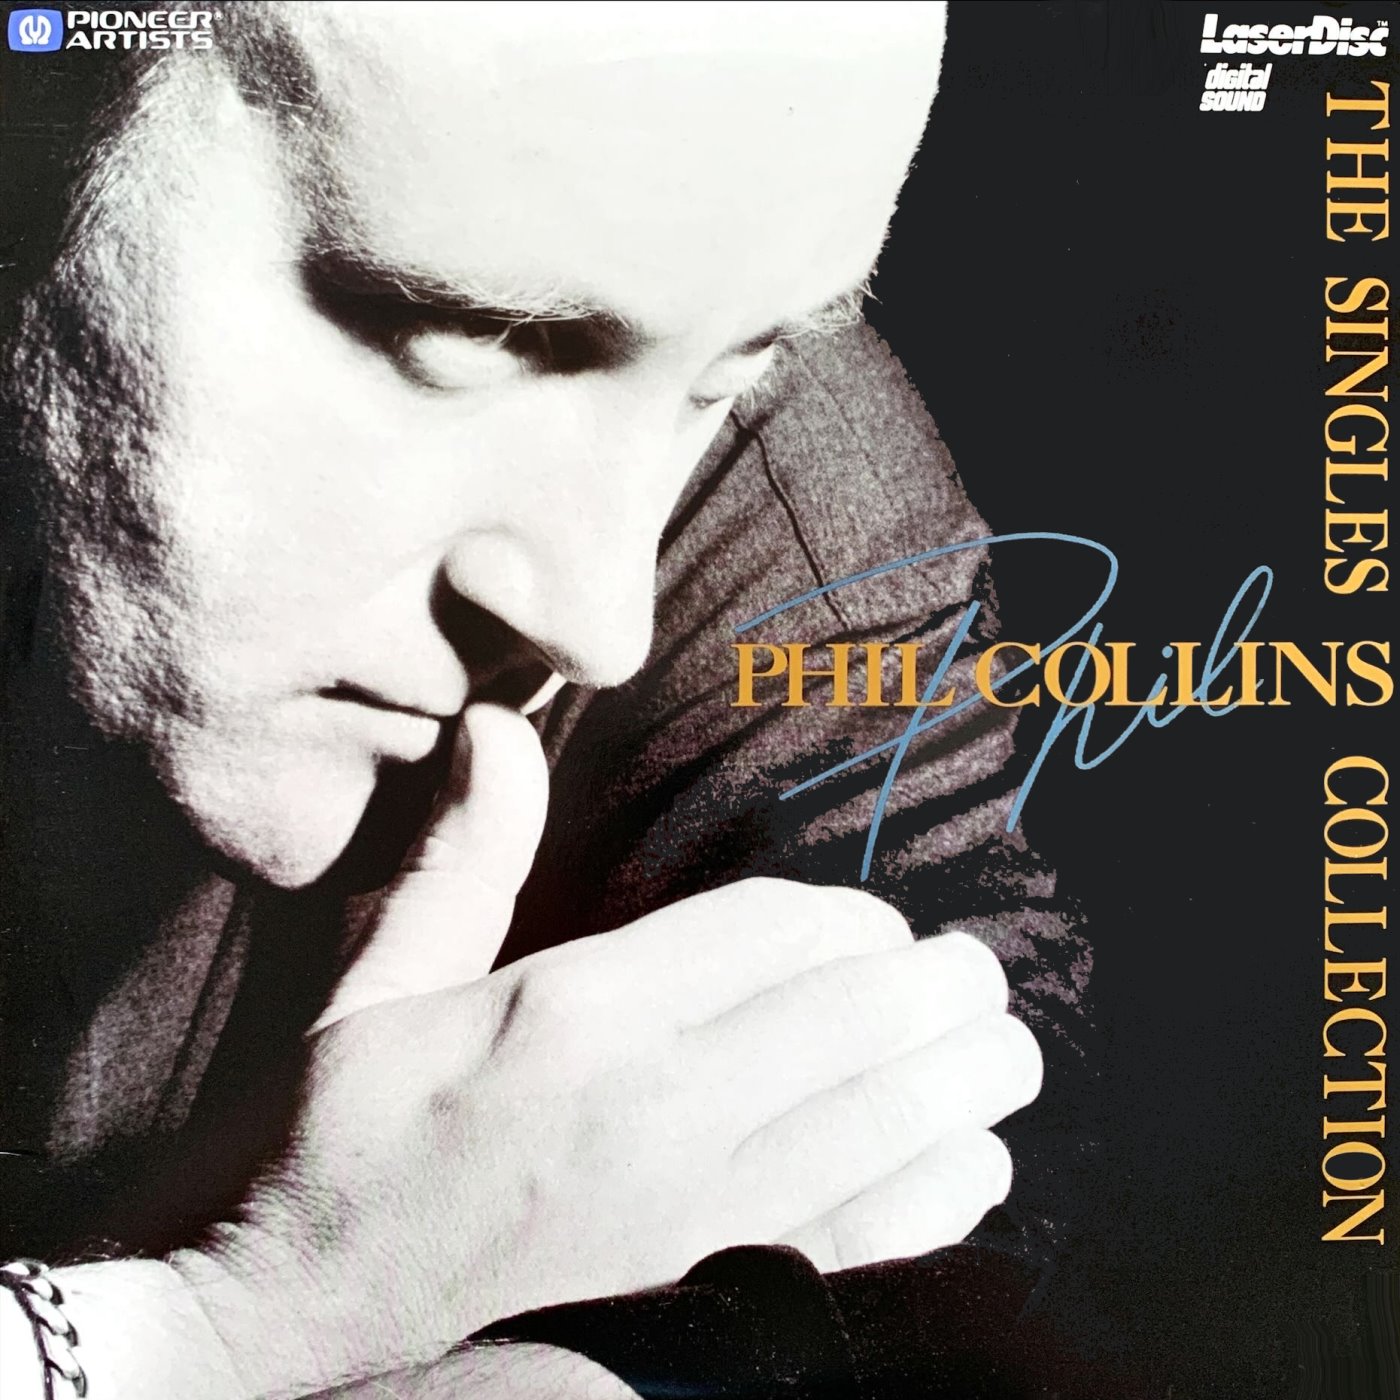 Cover - Phil Collins - The Singles Collection.jpg